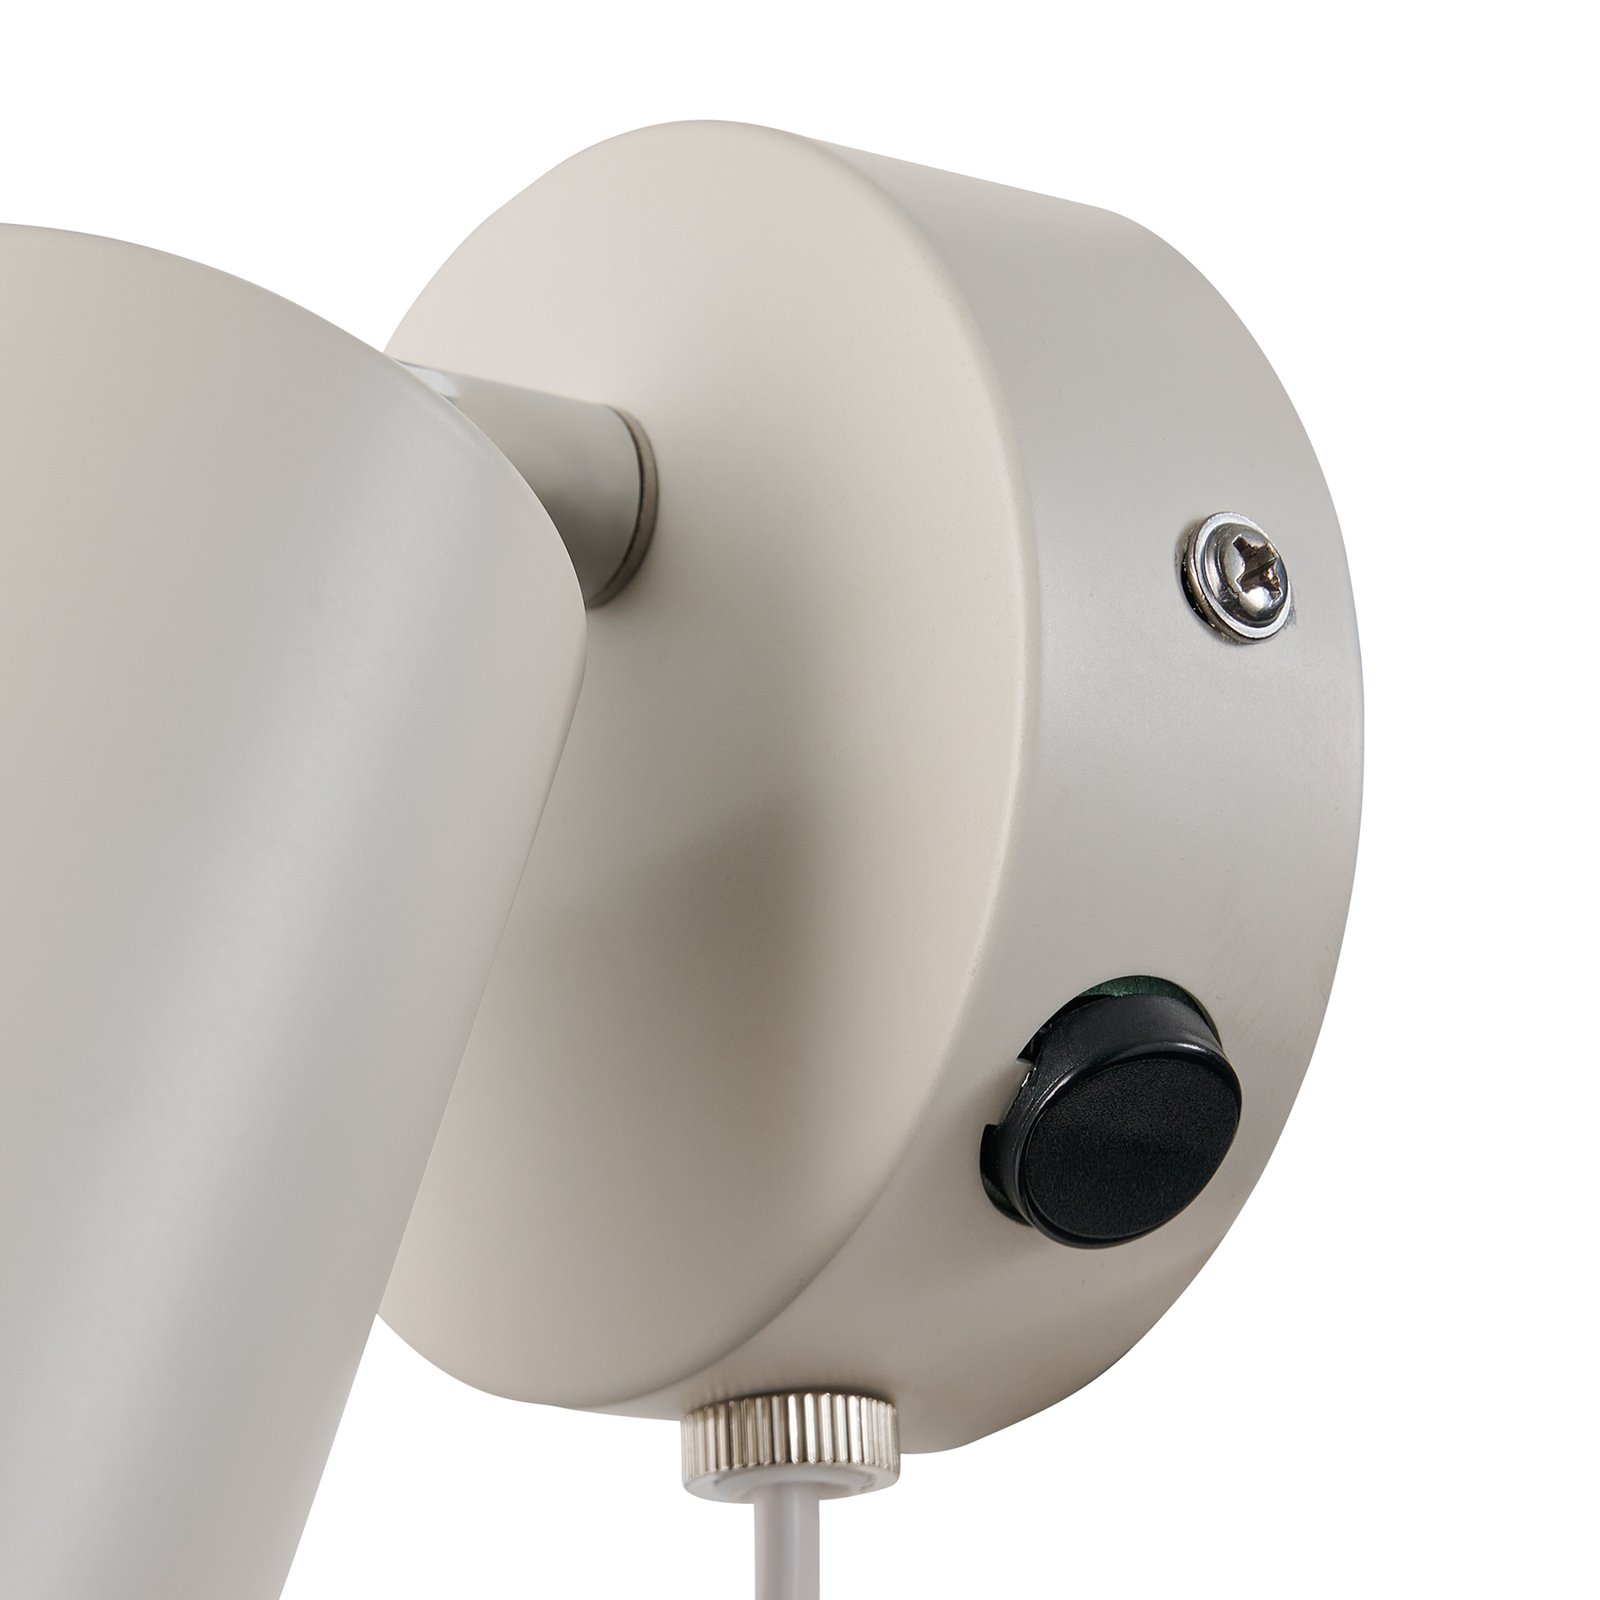 Explore wall spotlight with cable and plug, GU10, beige